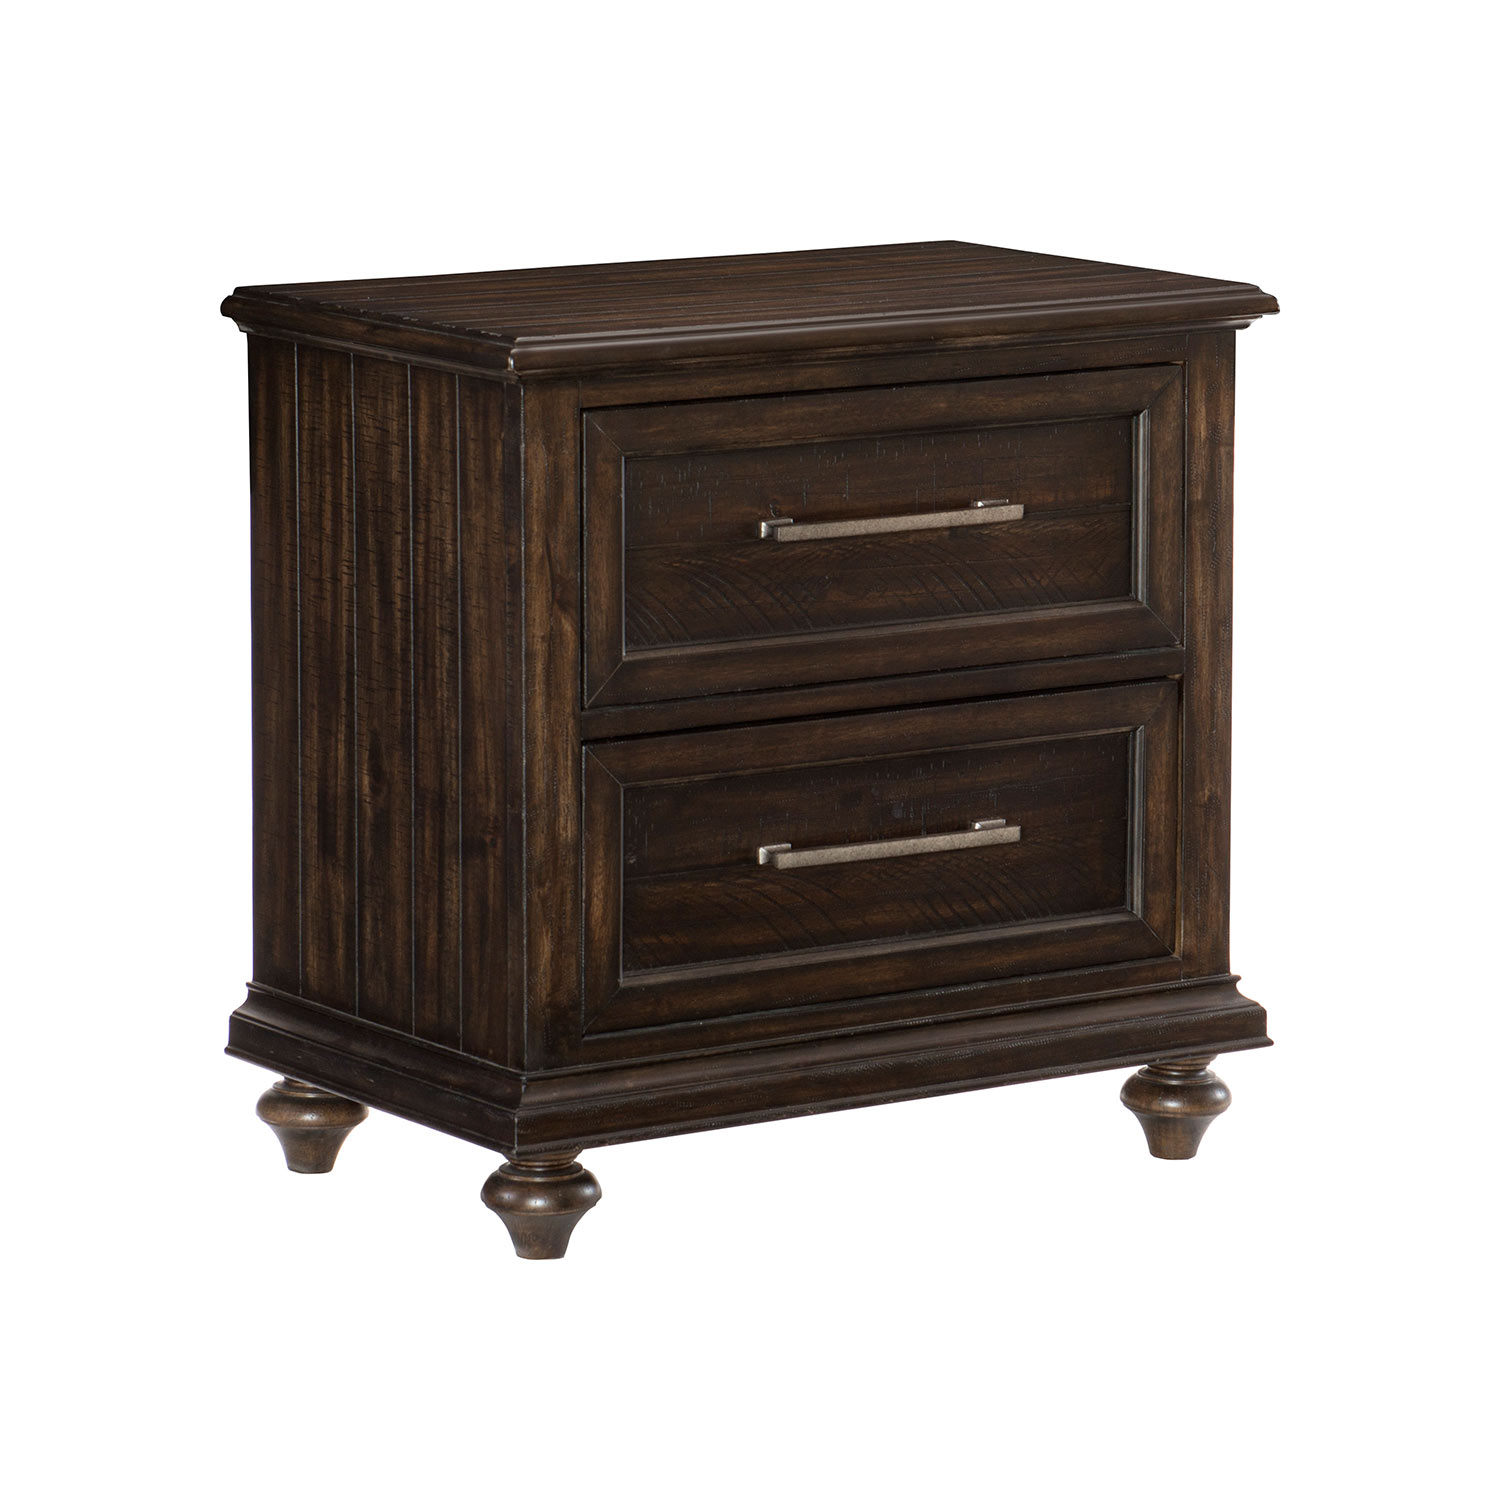 Homelegance Cardano Night Stand - Driftwood Charcoal over Acacia Solids and Veneers